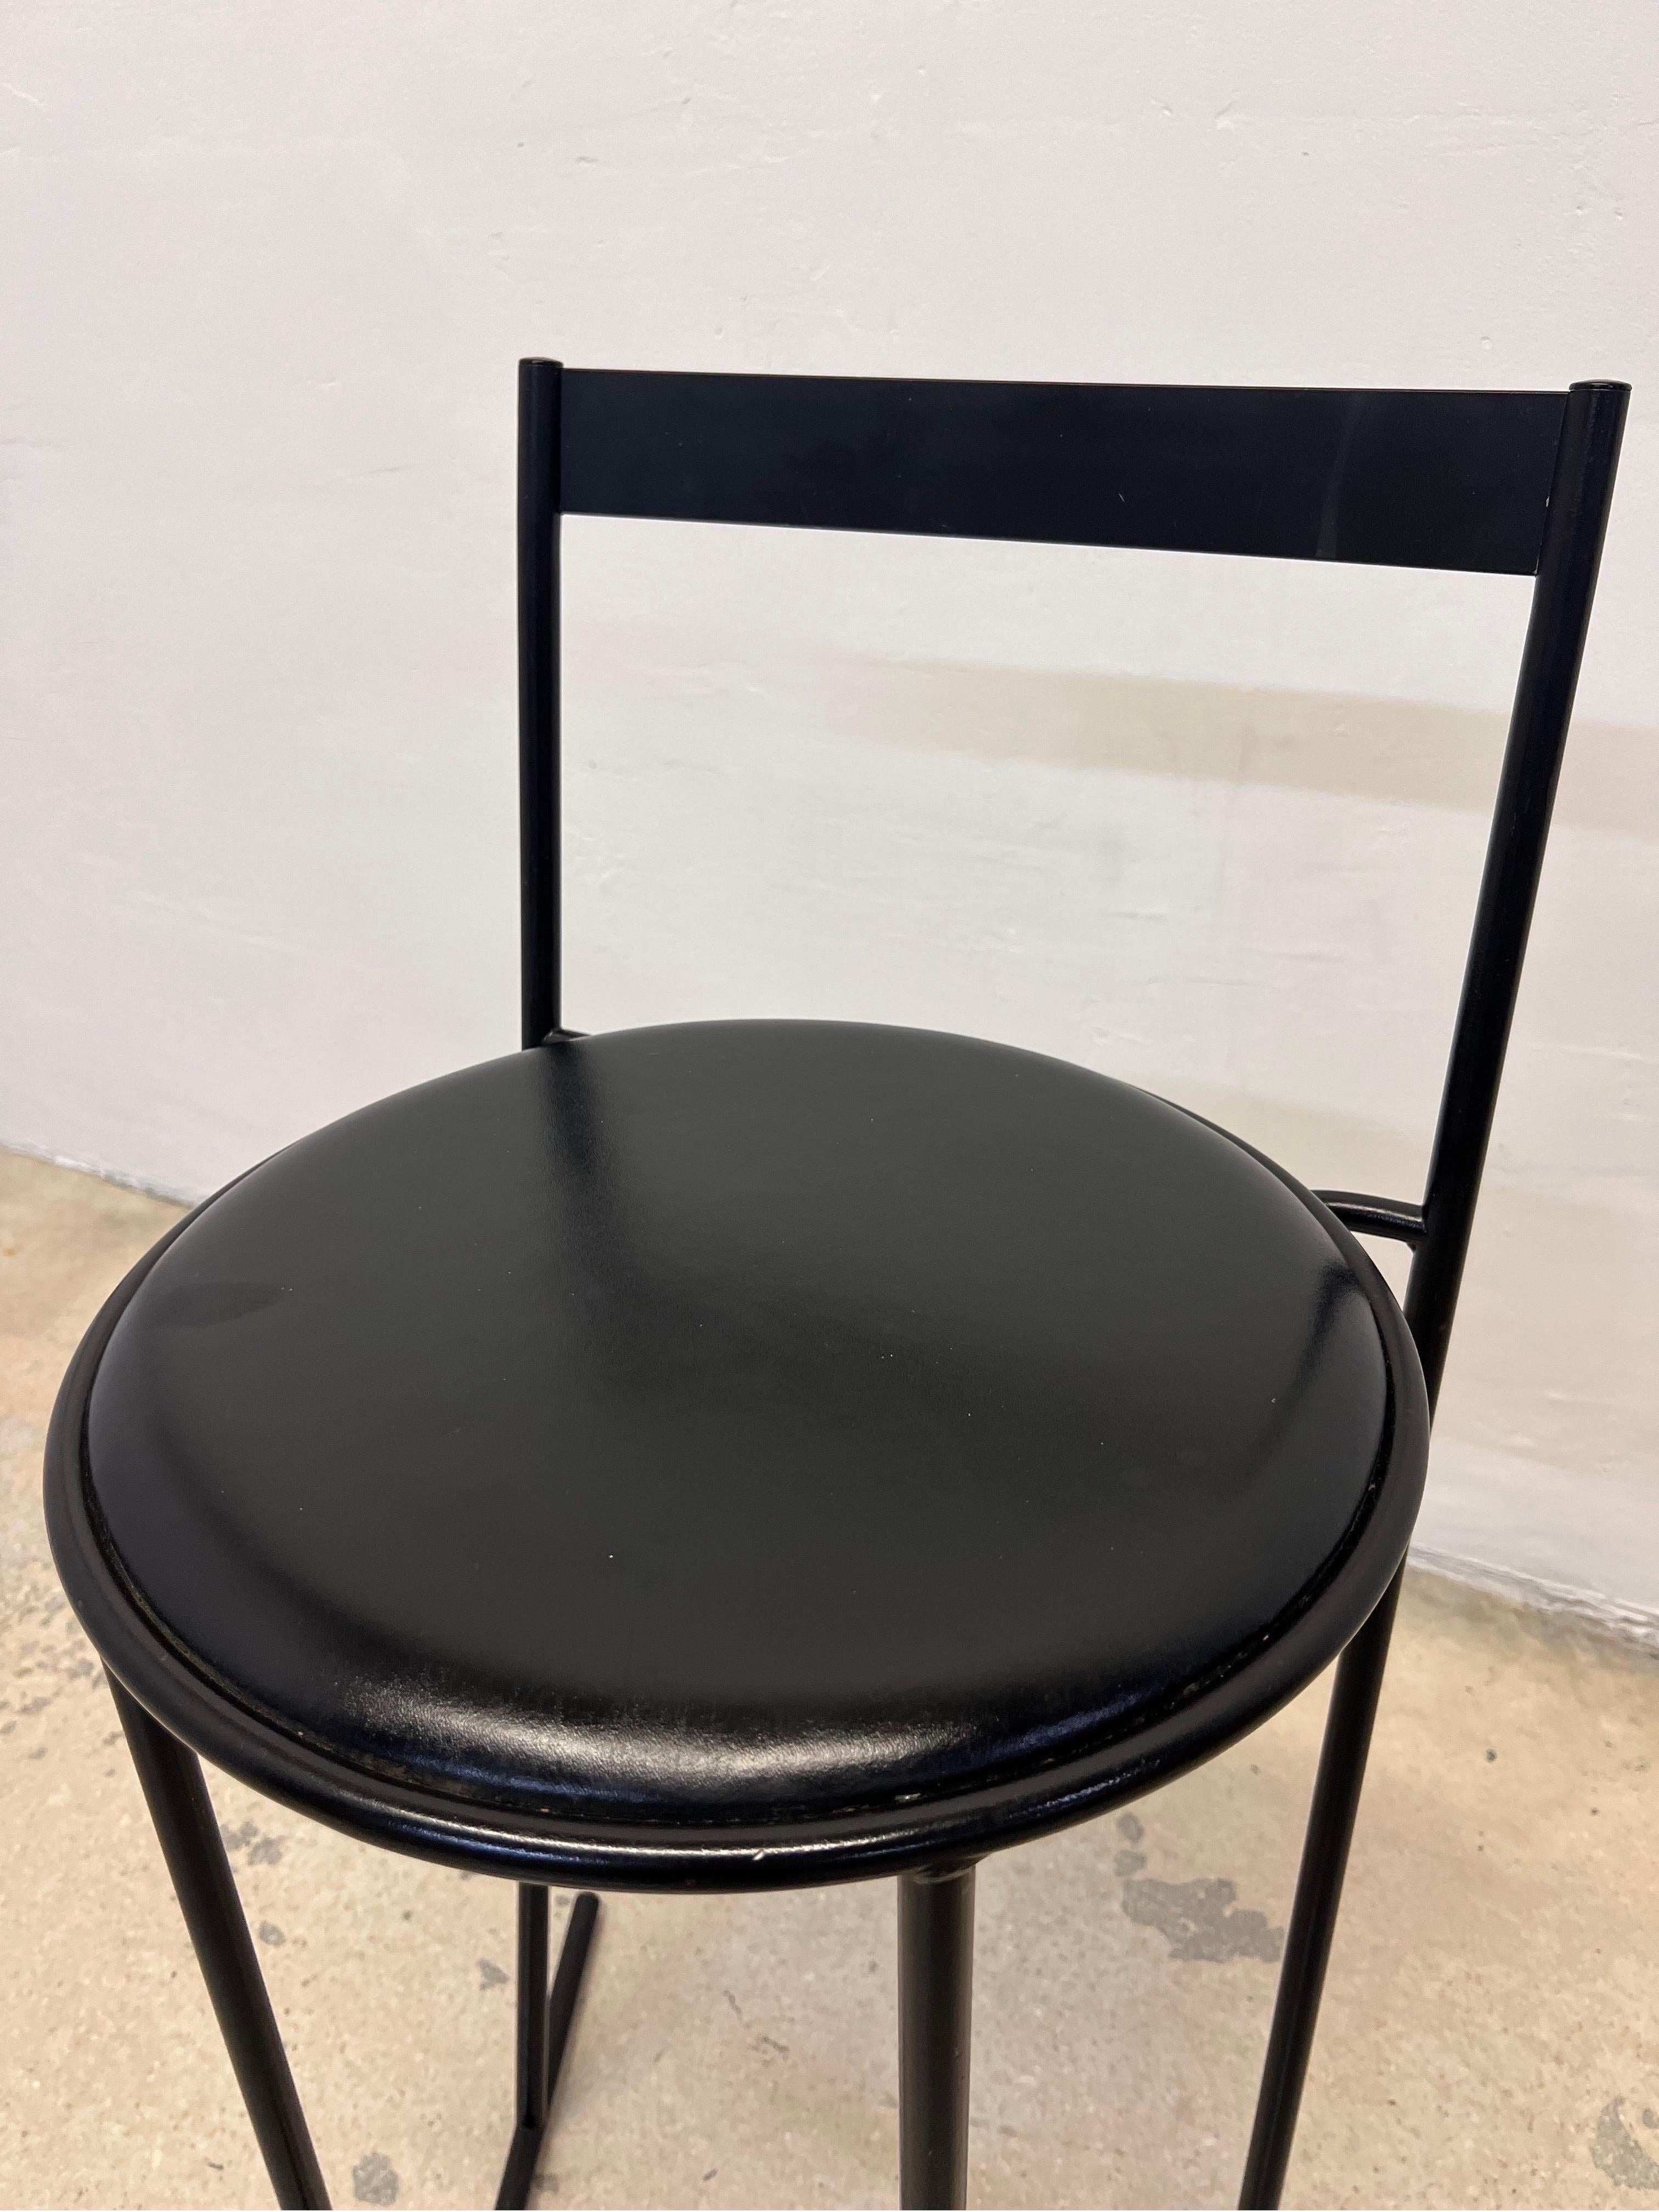 Steel Emilio Nanni Musmé Counter Stool for Fly Line, 1984 For Sale